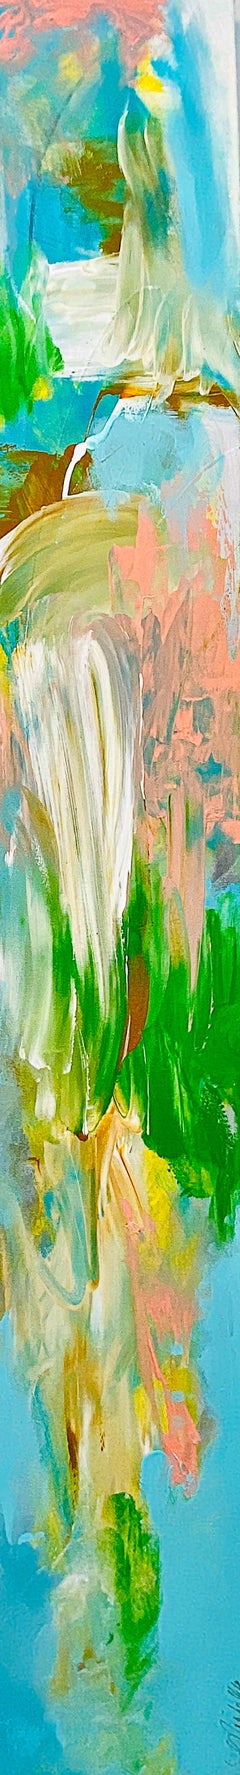 "Song of Spring", Landscape Abstract, Emotional, Pastel, Blue, Peach, Green